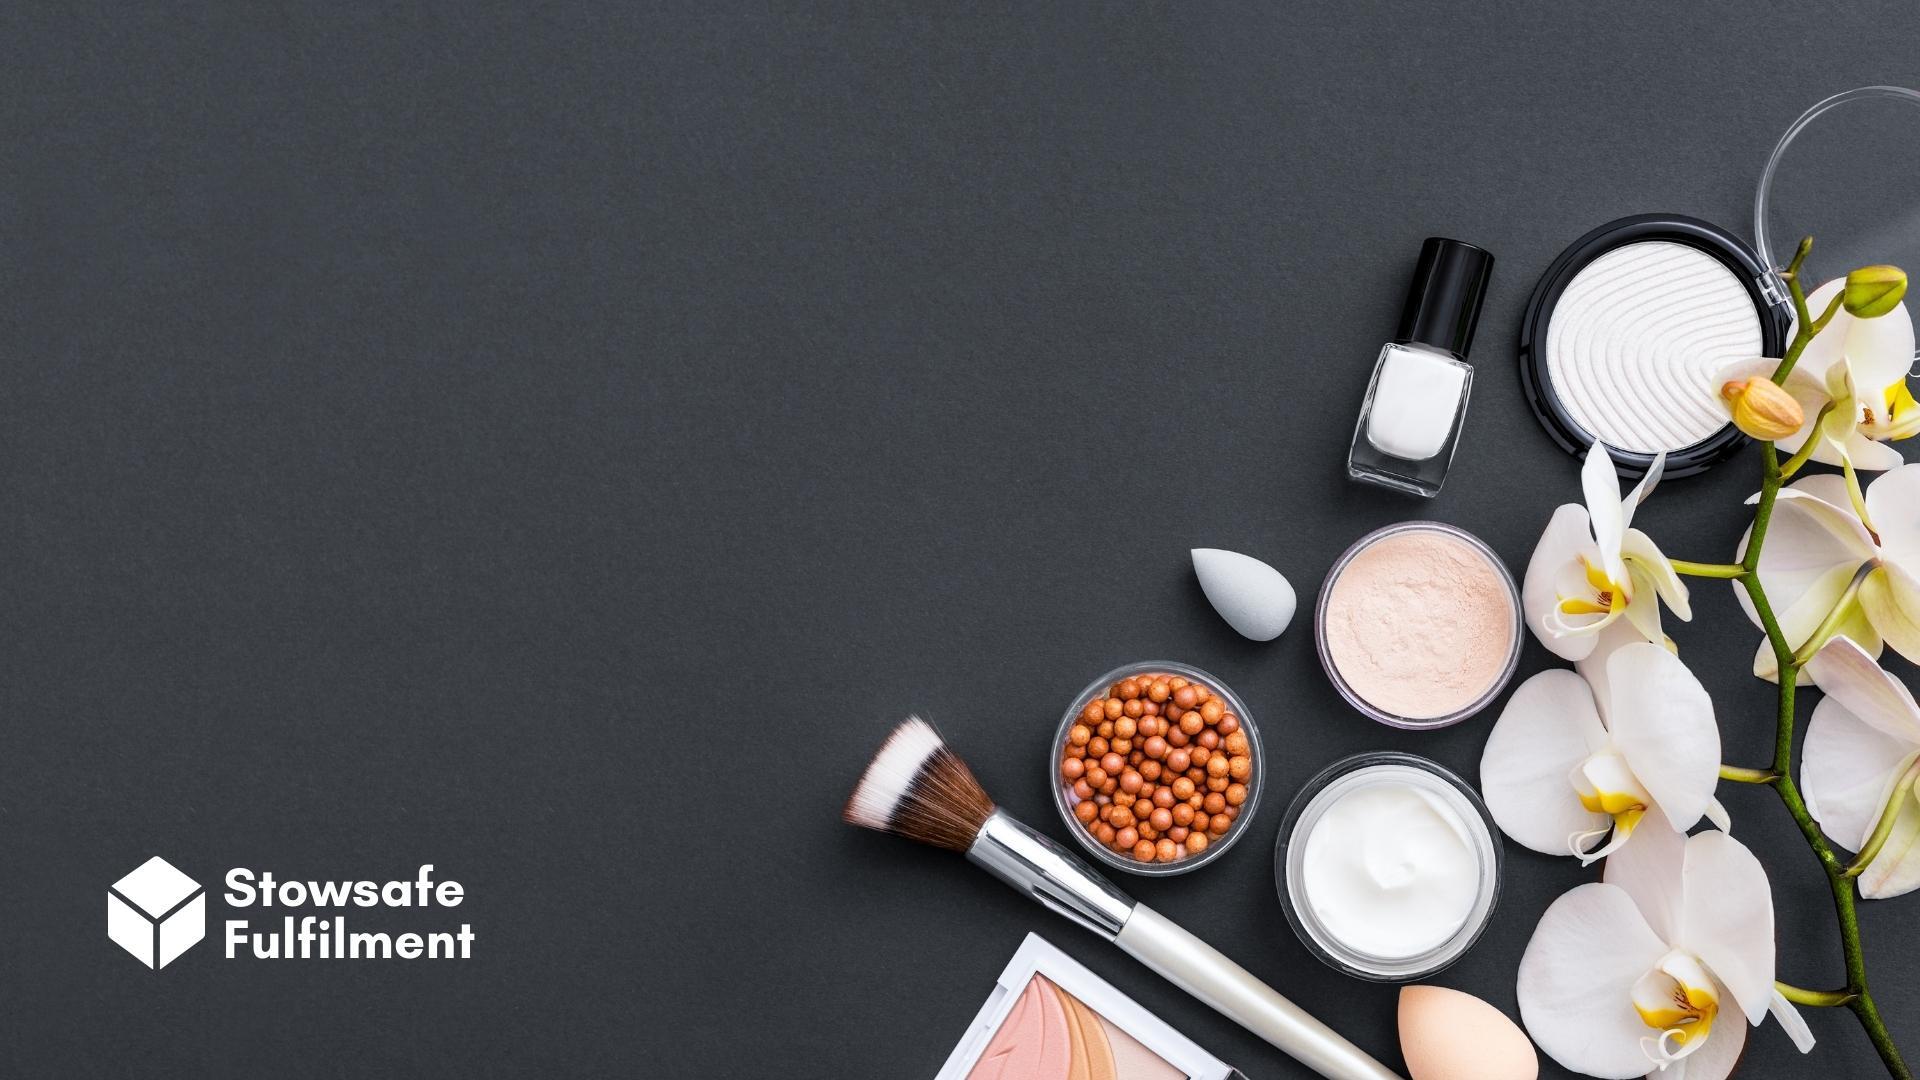 Running an eCommerce beauty brand? You'll know how time-consuming fulfilment is. Read on to learn how a 3PL can help you save time and grow online.